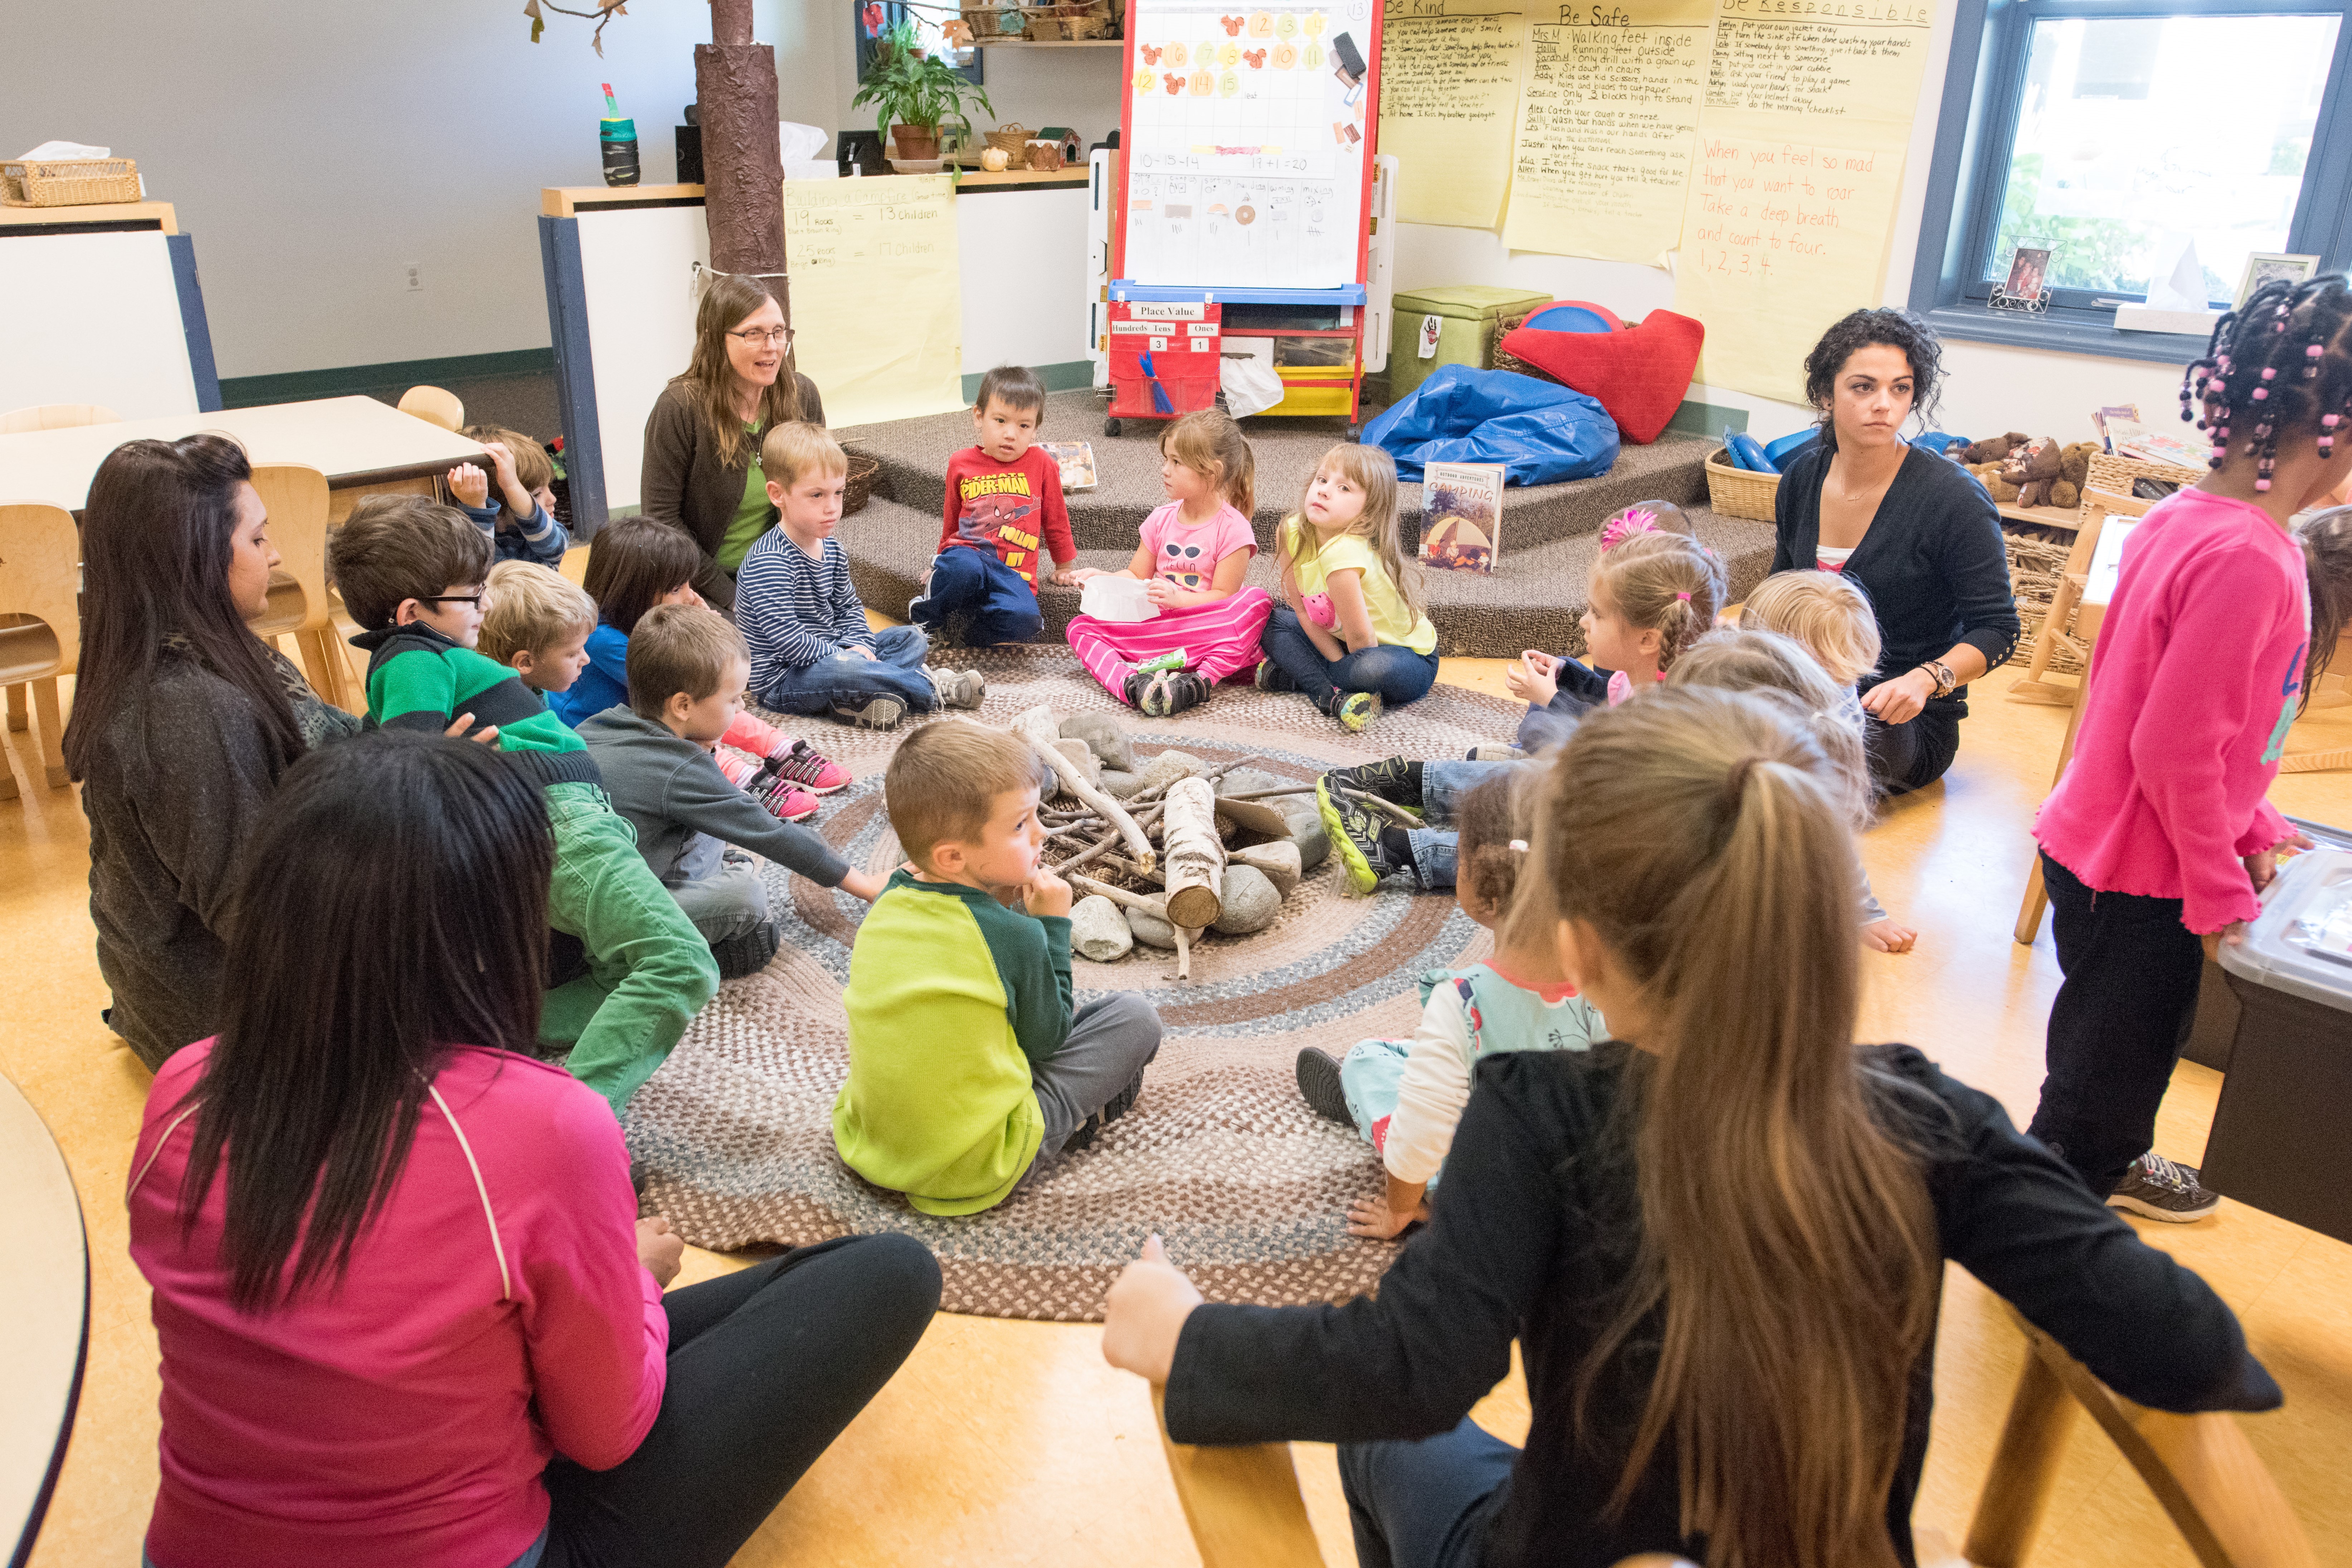 This is an image of young children having a discussion with their teachers.